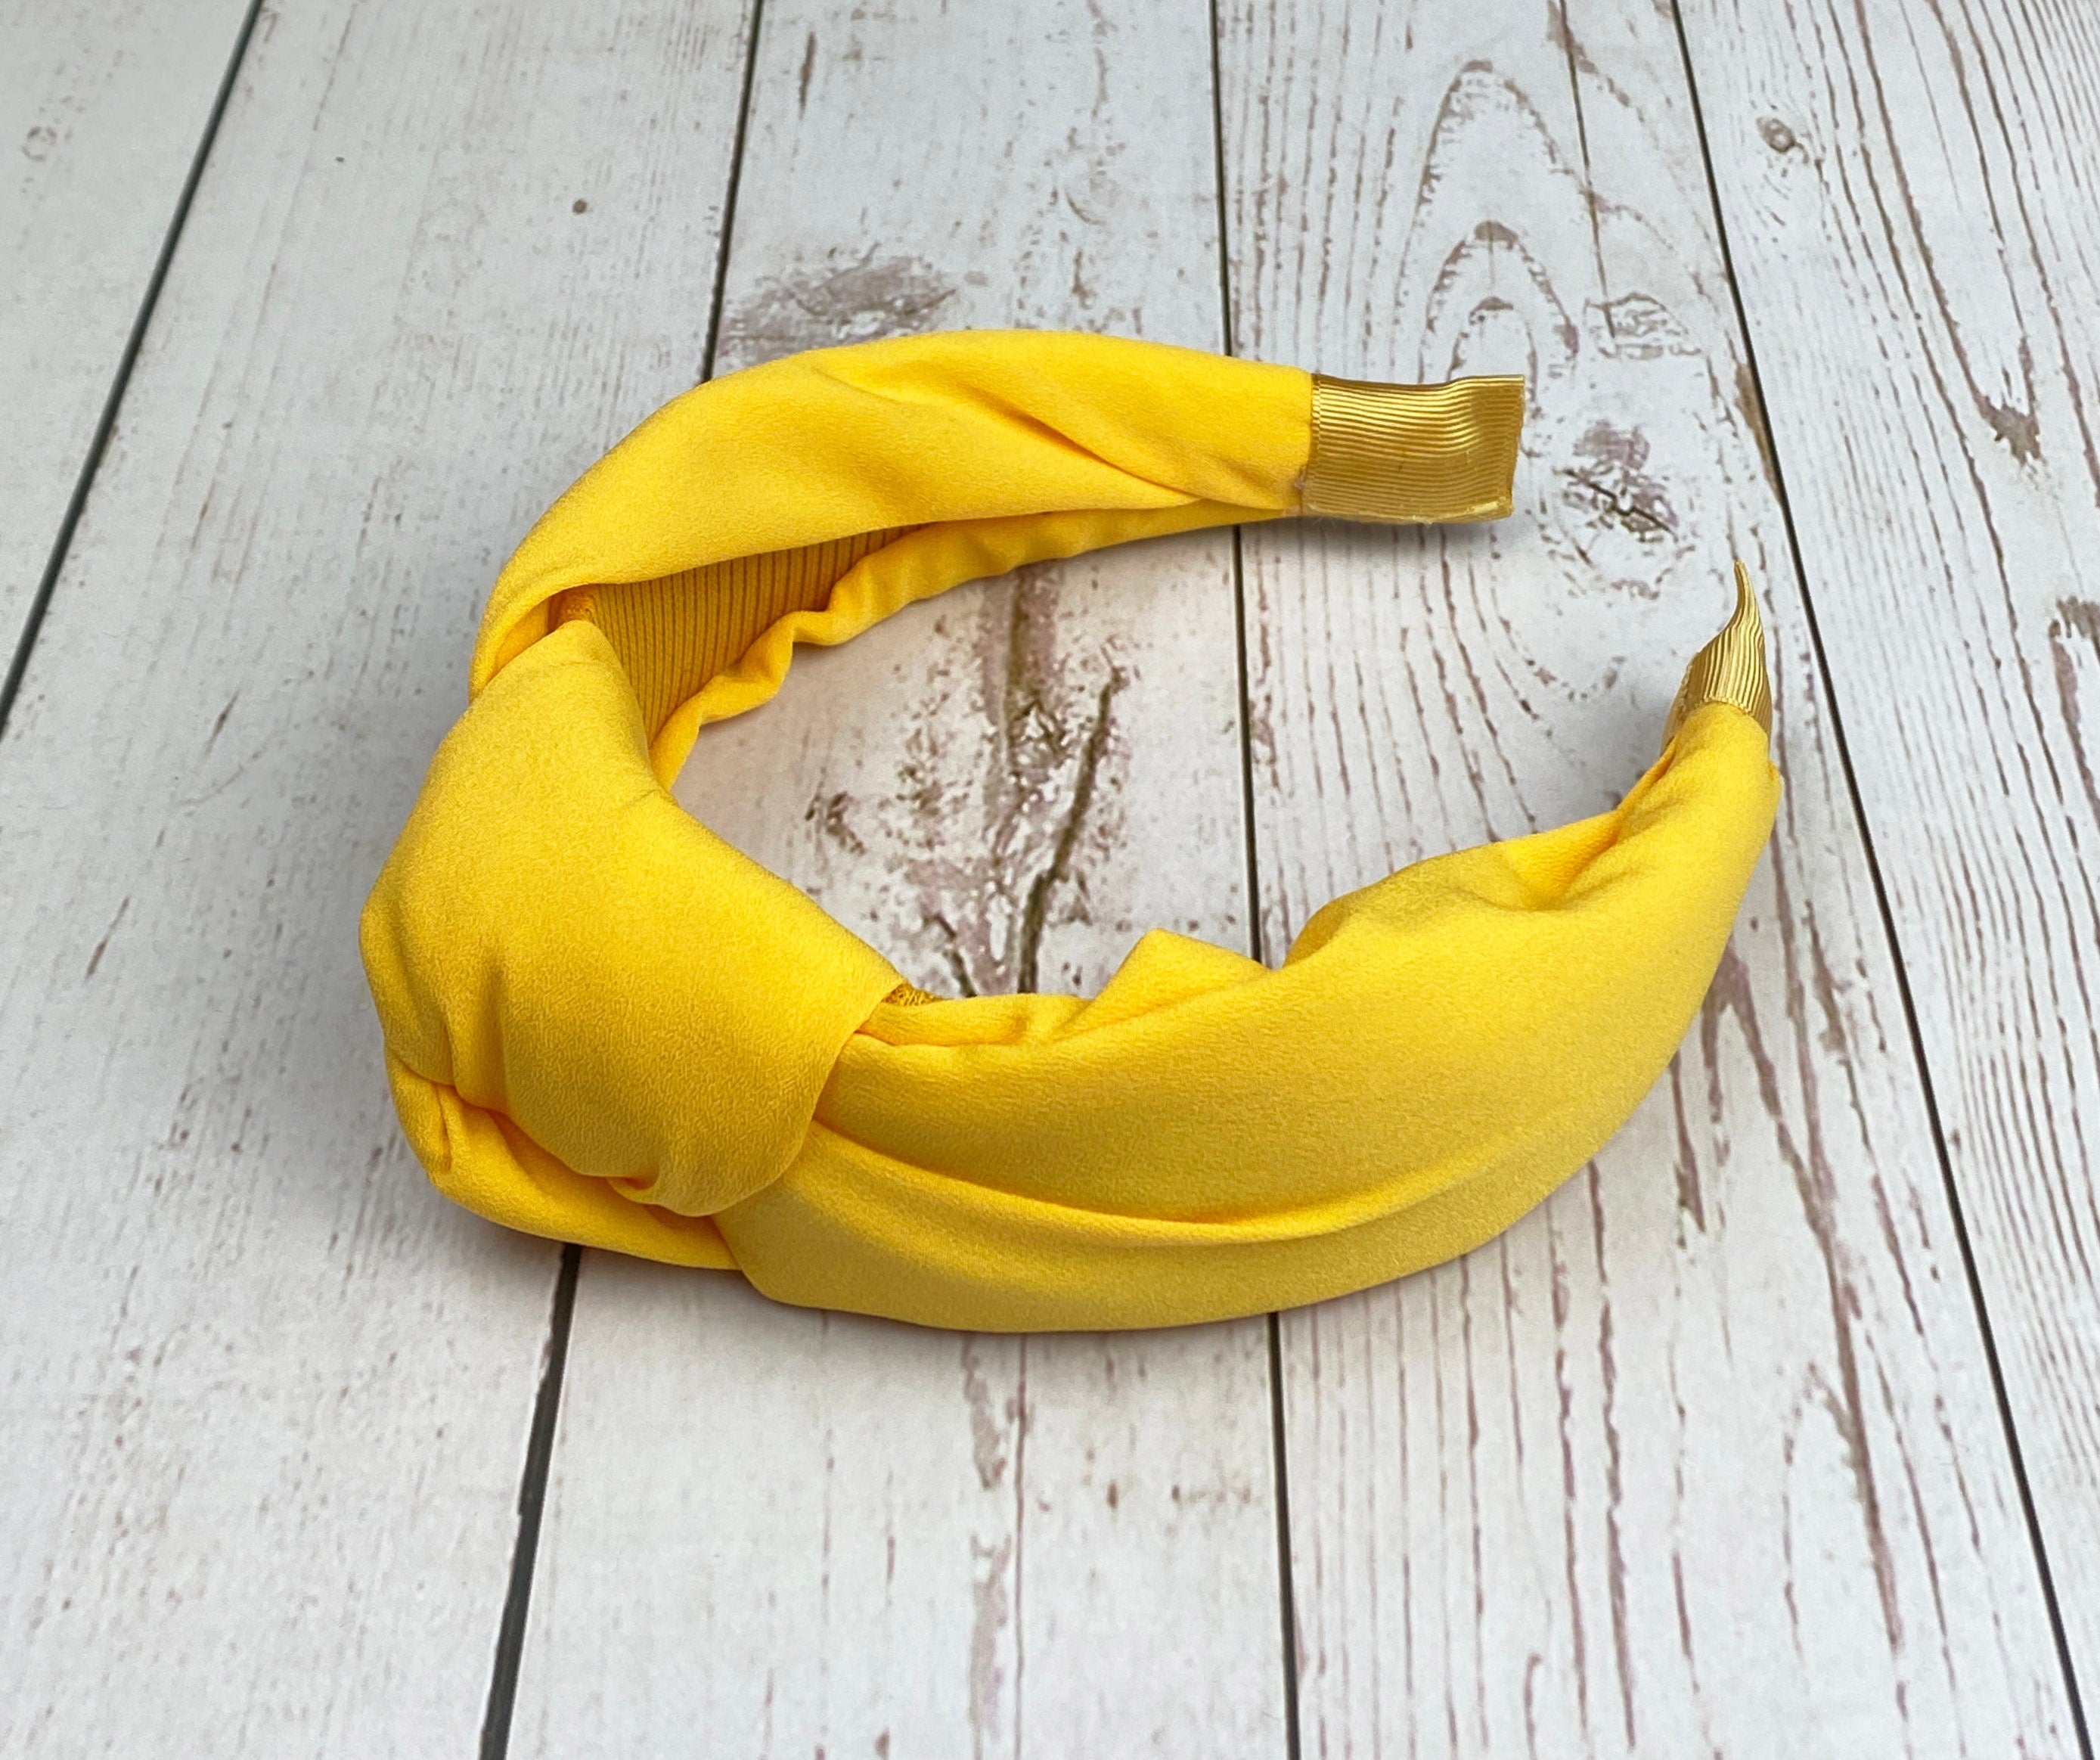 Looking for a statement piece to complete your outfit? Look no further than our Yellow Headband! With its bold hue and eye-catching design, this headband is sure to turn heads.